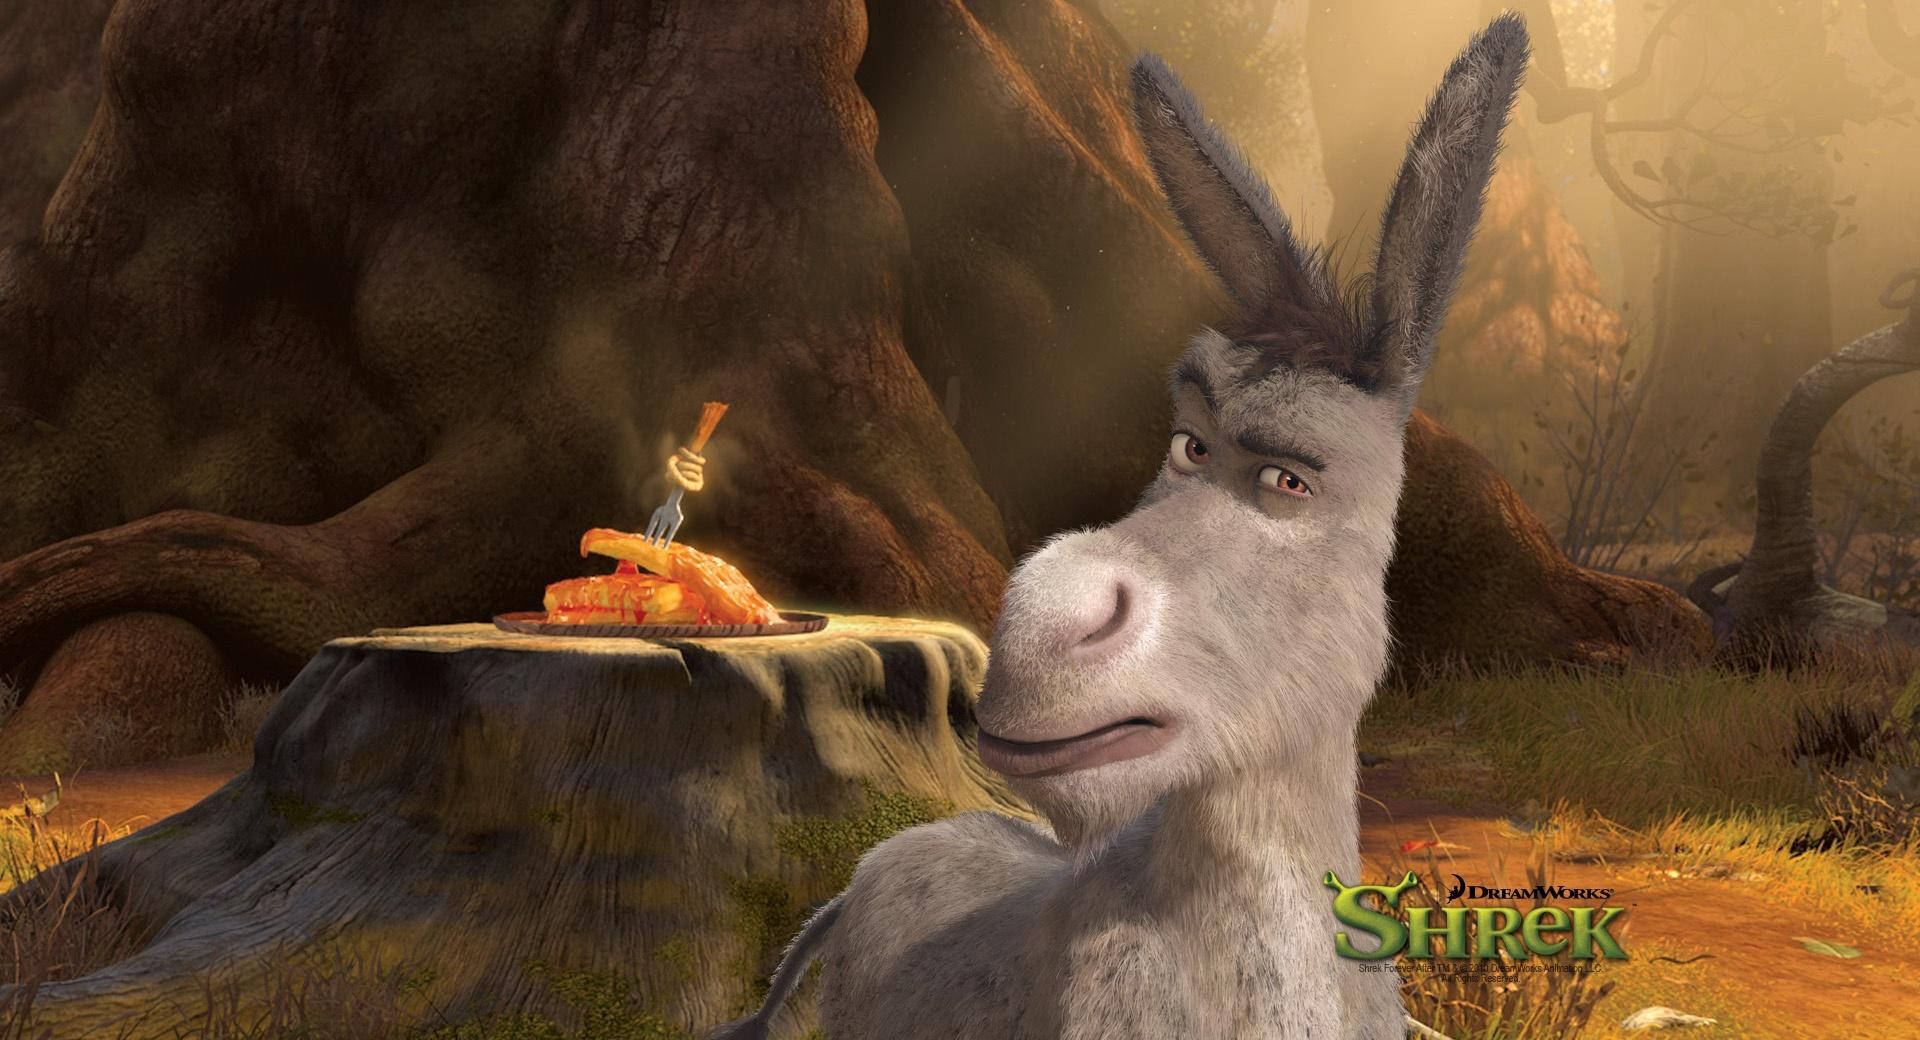 Donkey in a Magical Forest - A Still from Shrek 2 Wallpaper